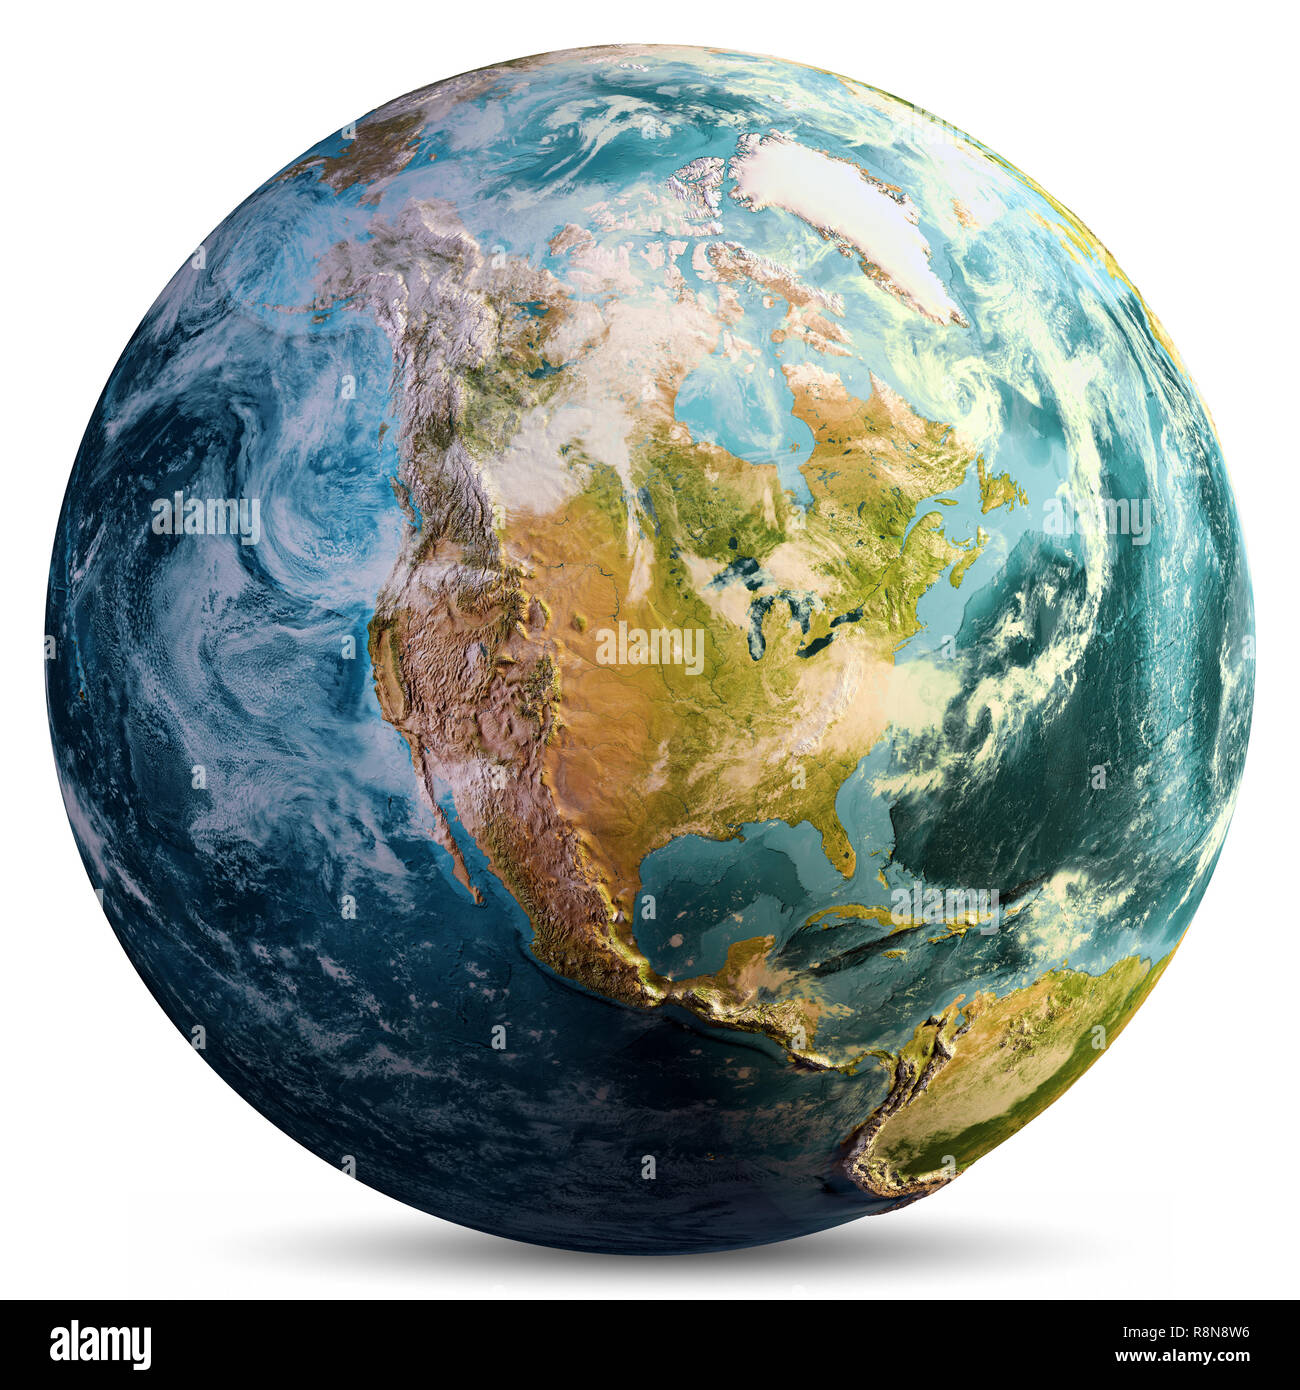 Planet Earth map Stock Photo